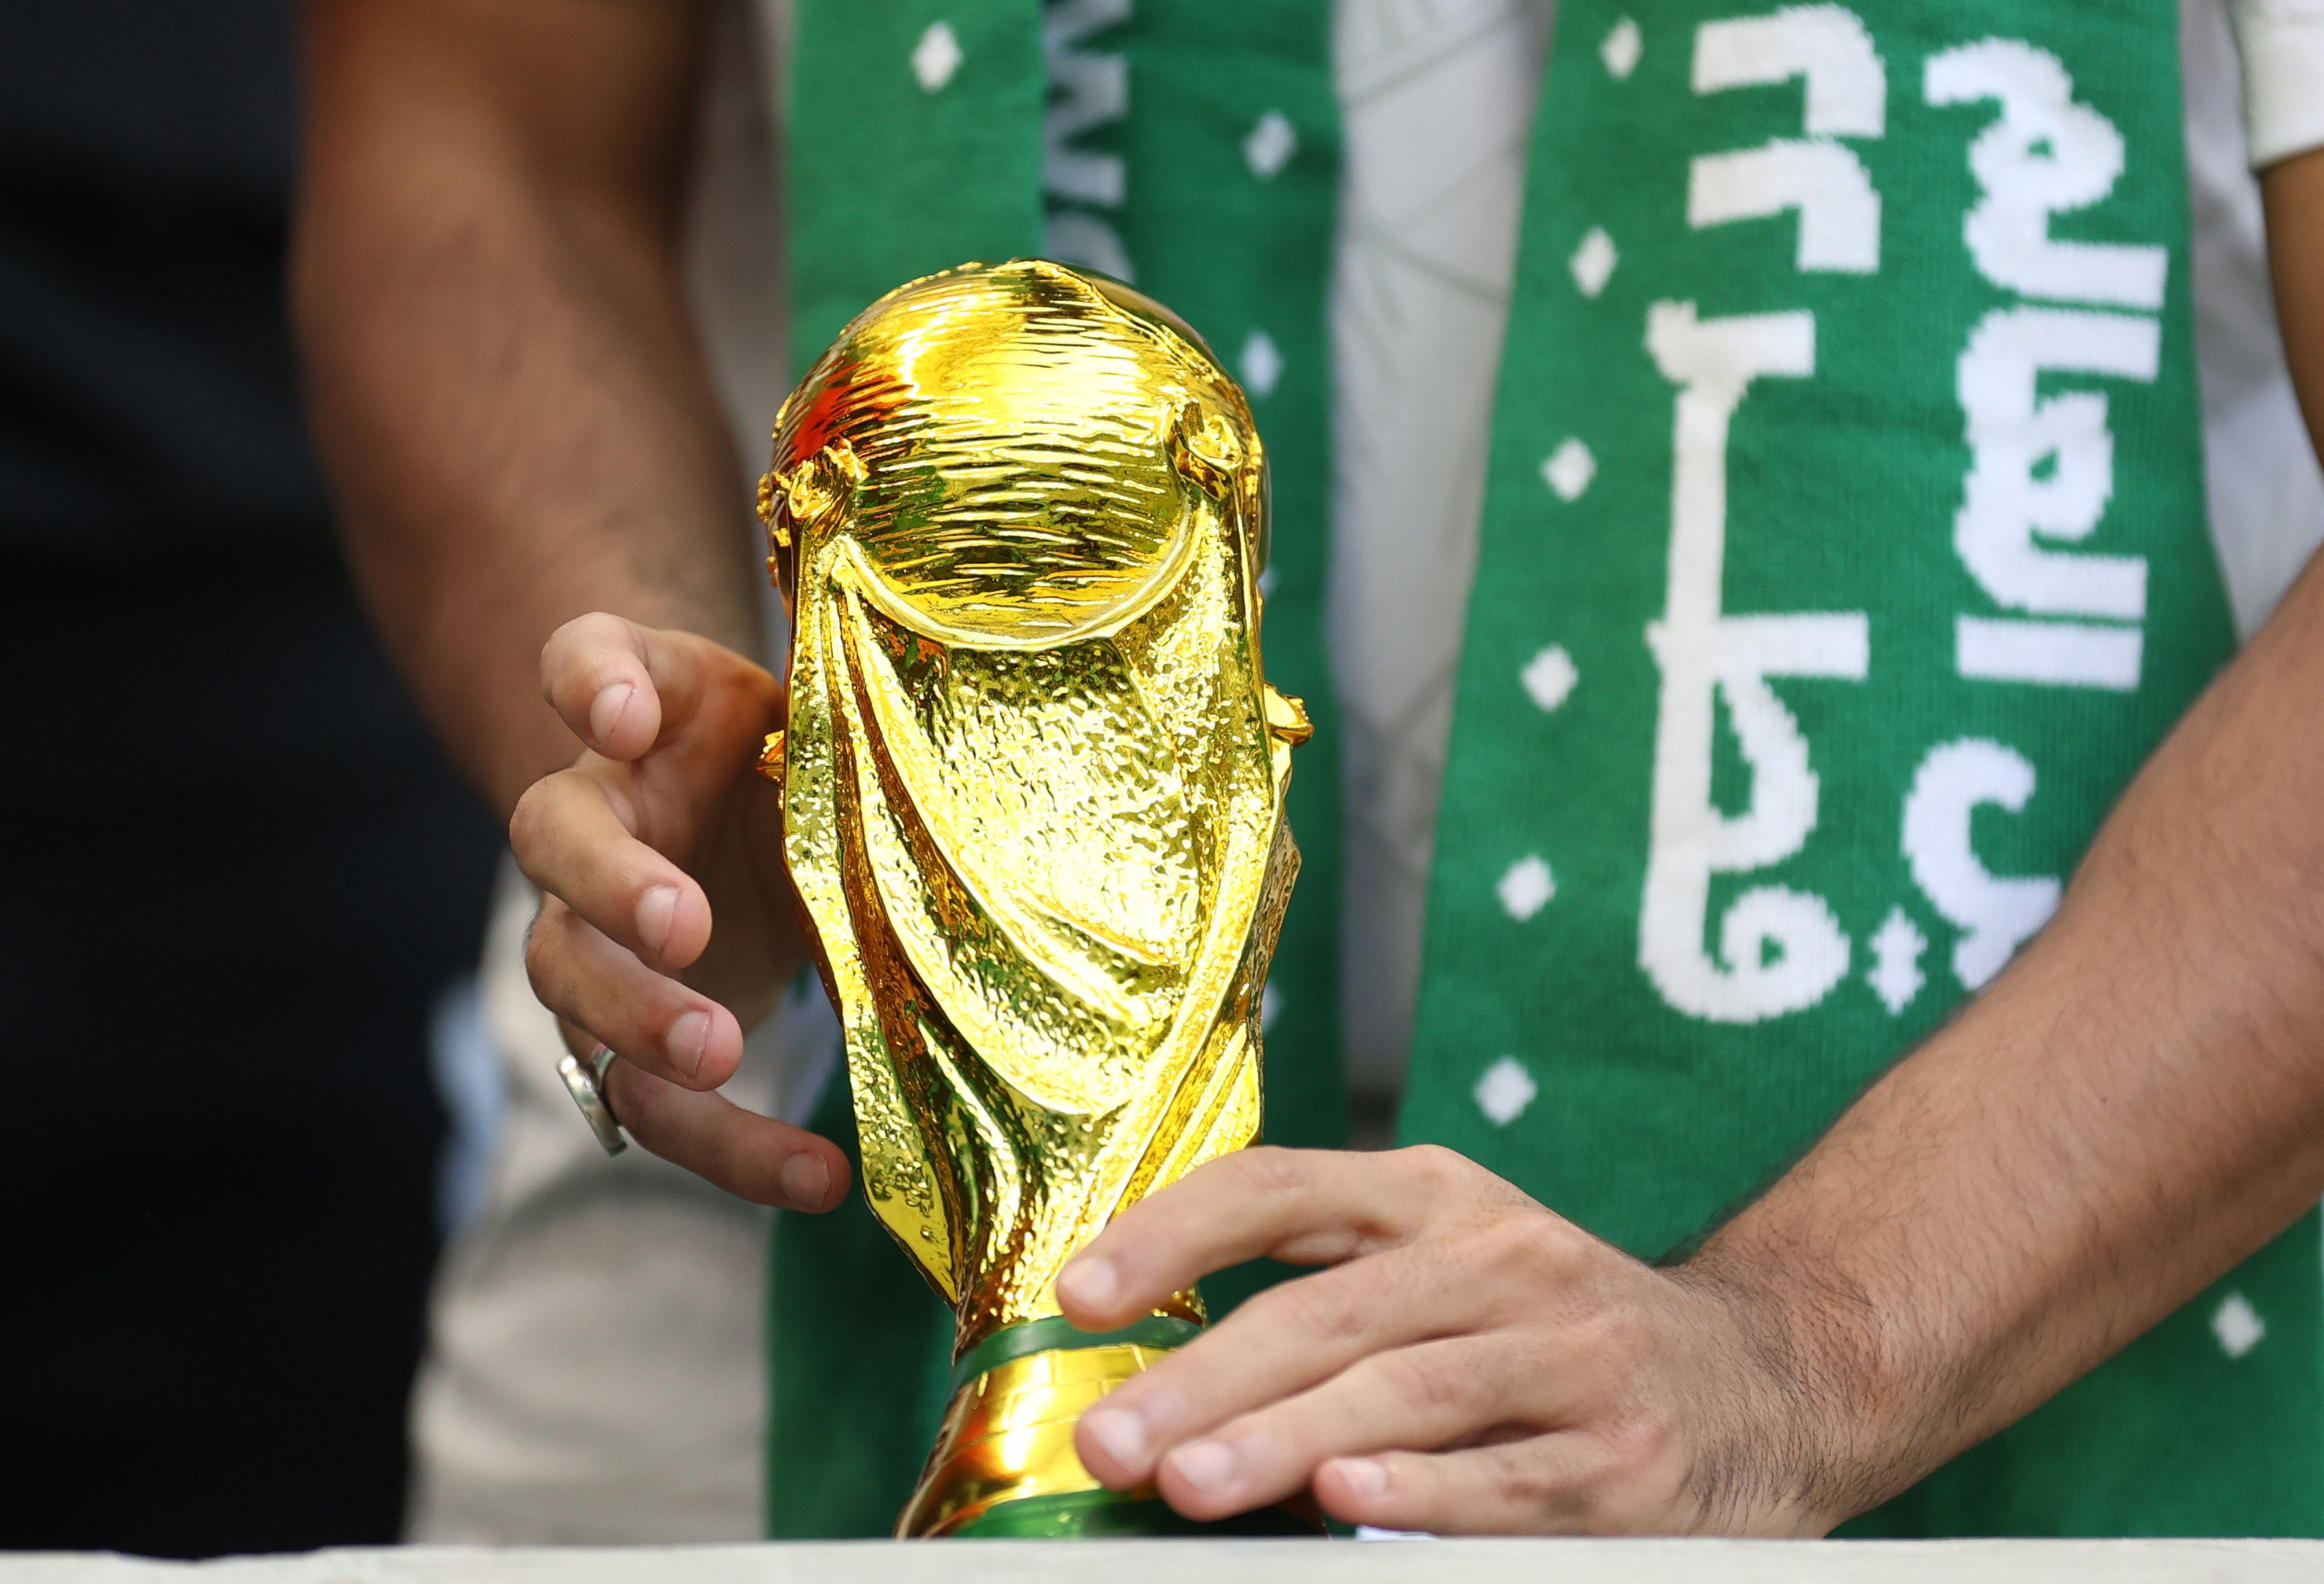 A Saudi Arabia fan with a replica World Cup Trophy during the Fifa World Cup Qatar 2022